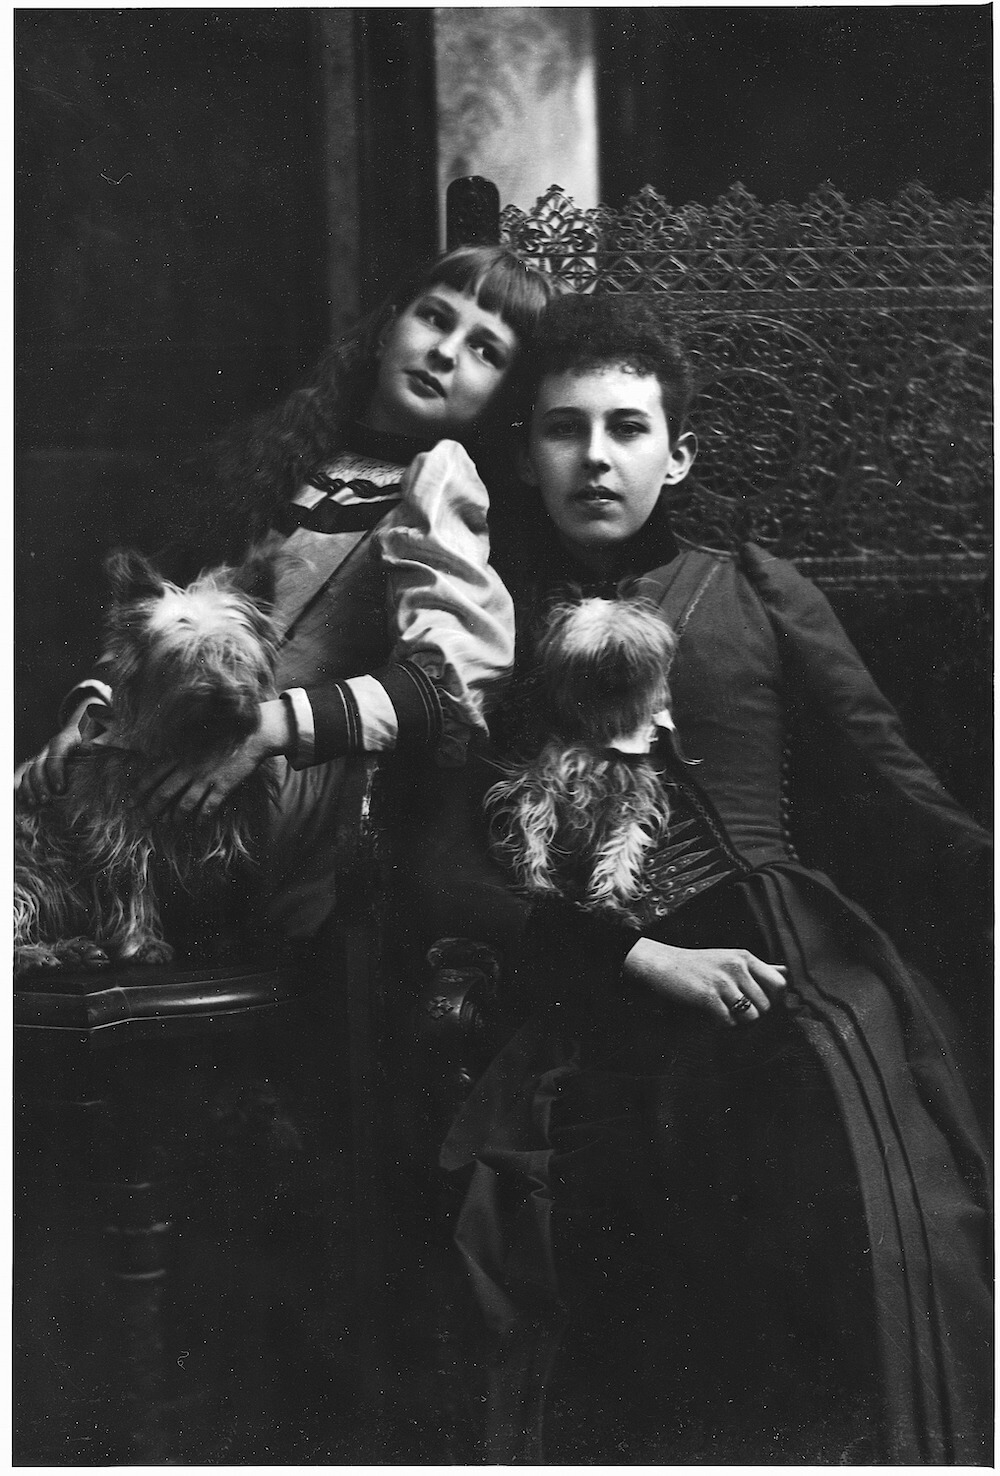 1891 - The Misses Lyman and dogs, Montreal